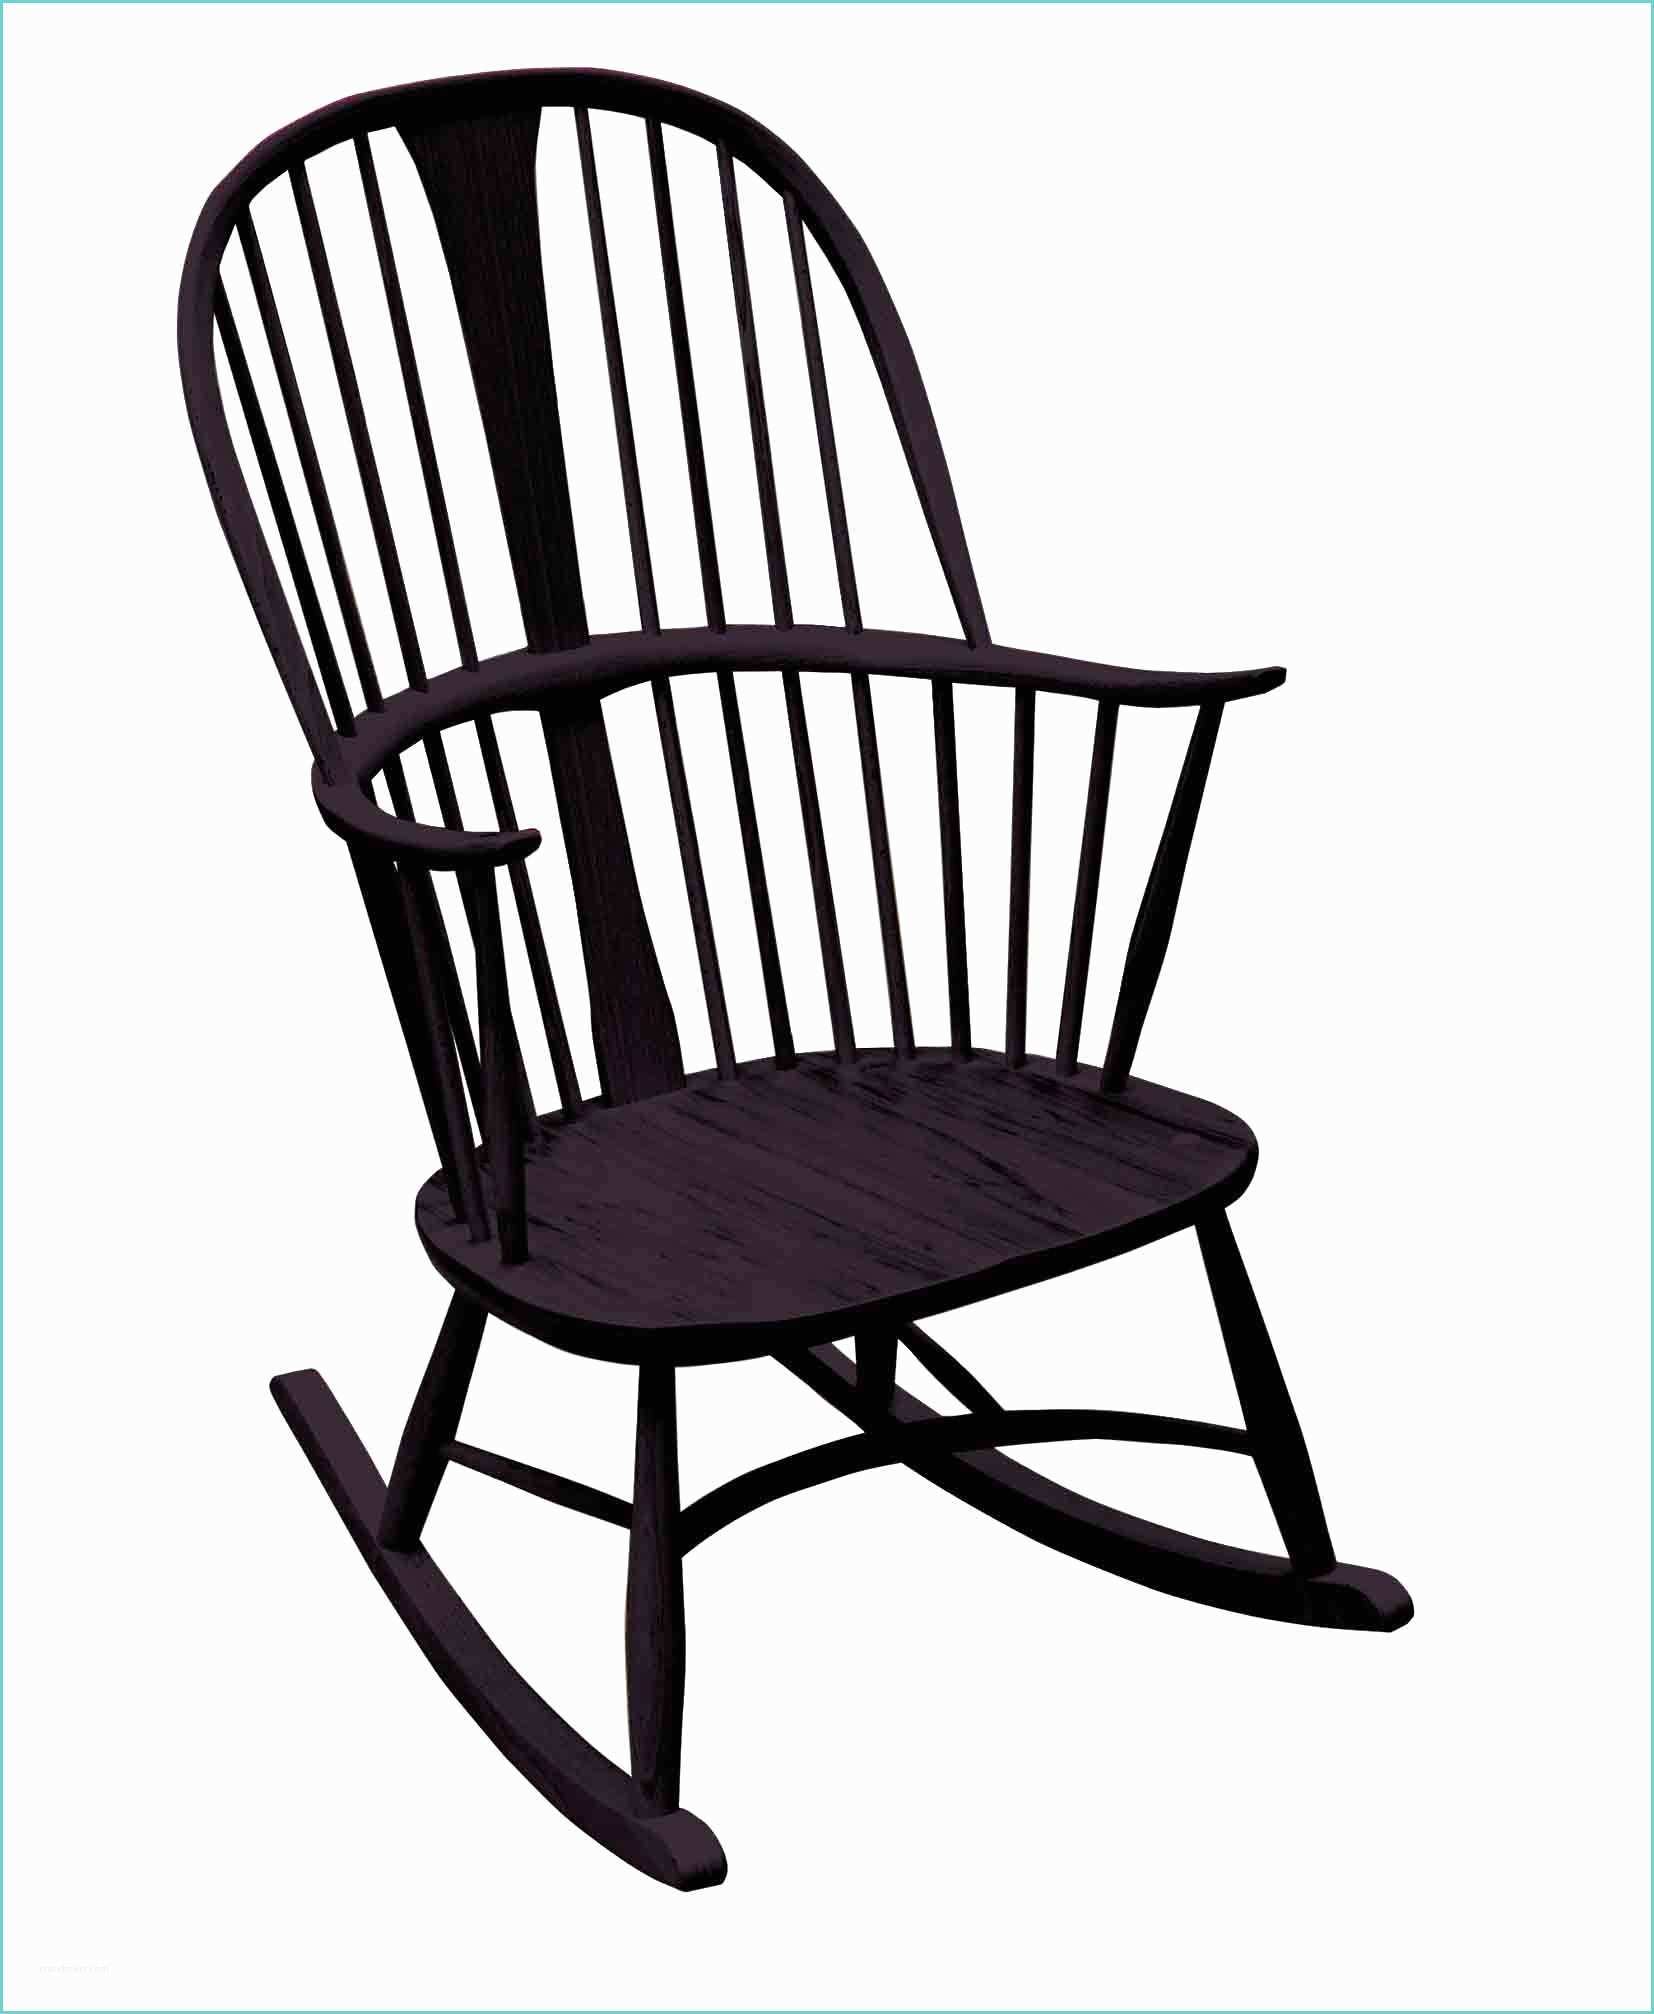 Originals Chairmakers Rocking Chair Ercol originals 912 Chairmakers Rocking Chair In Painted